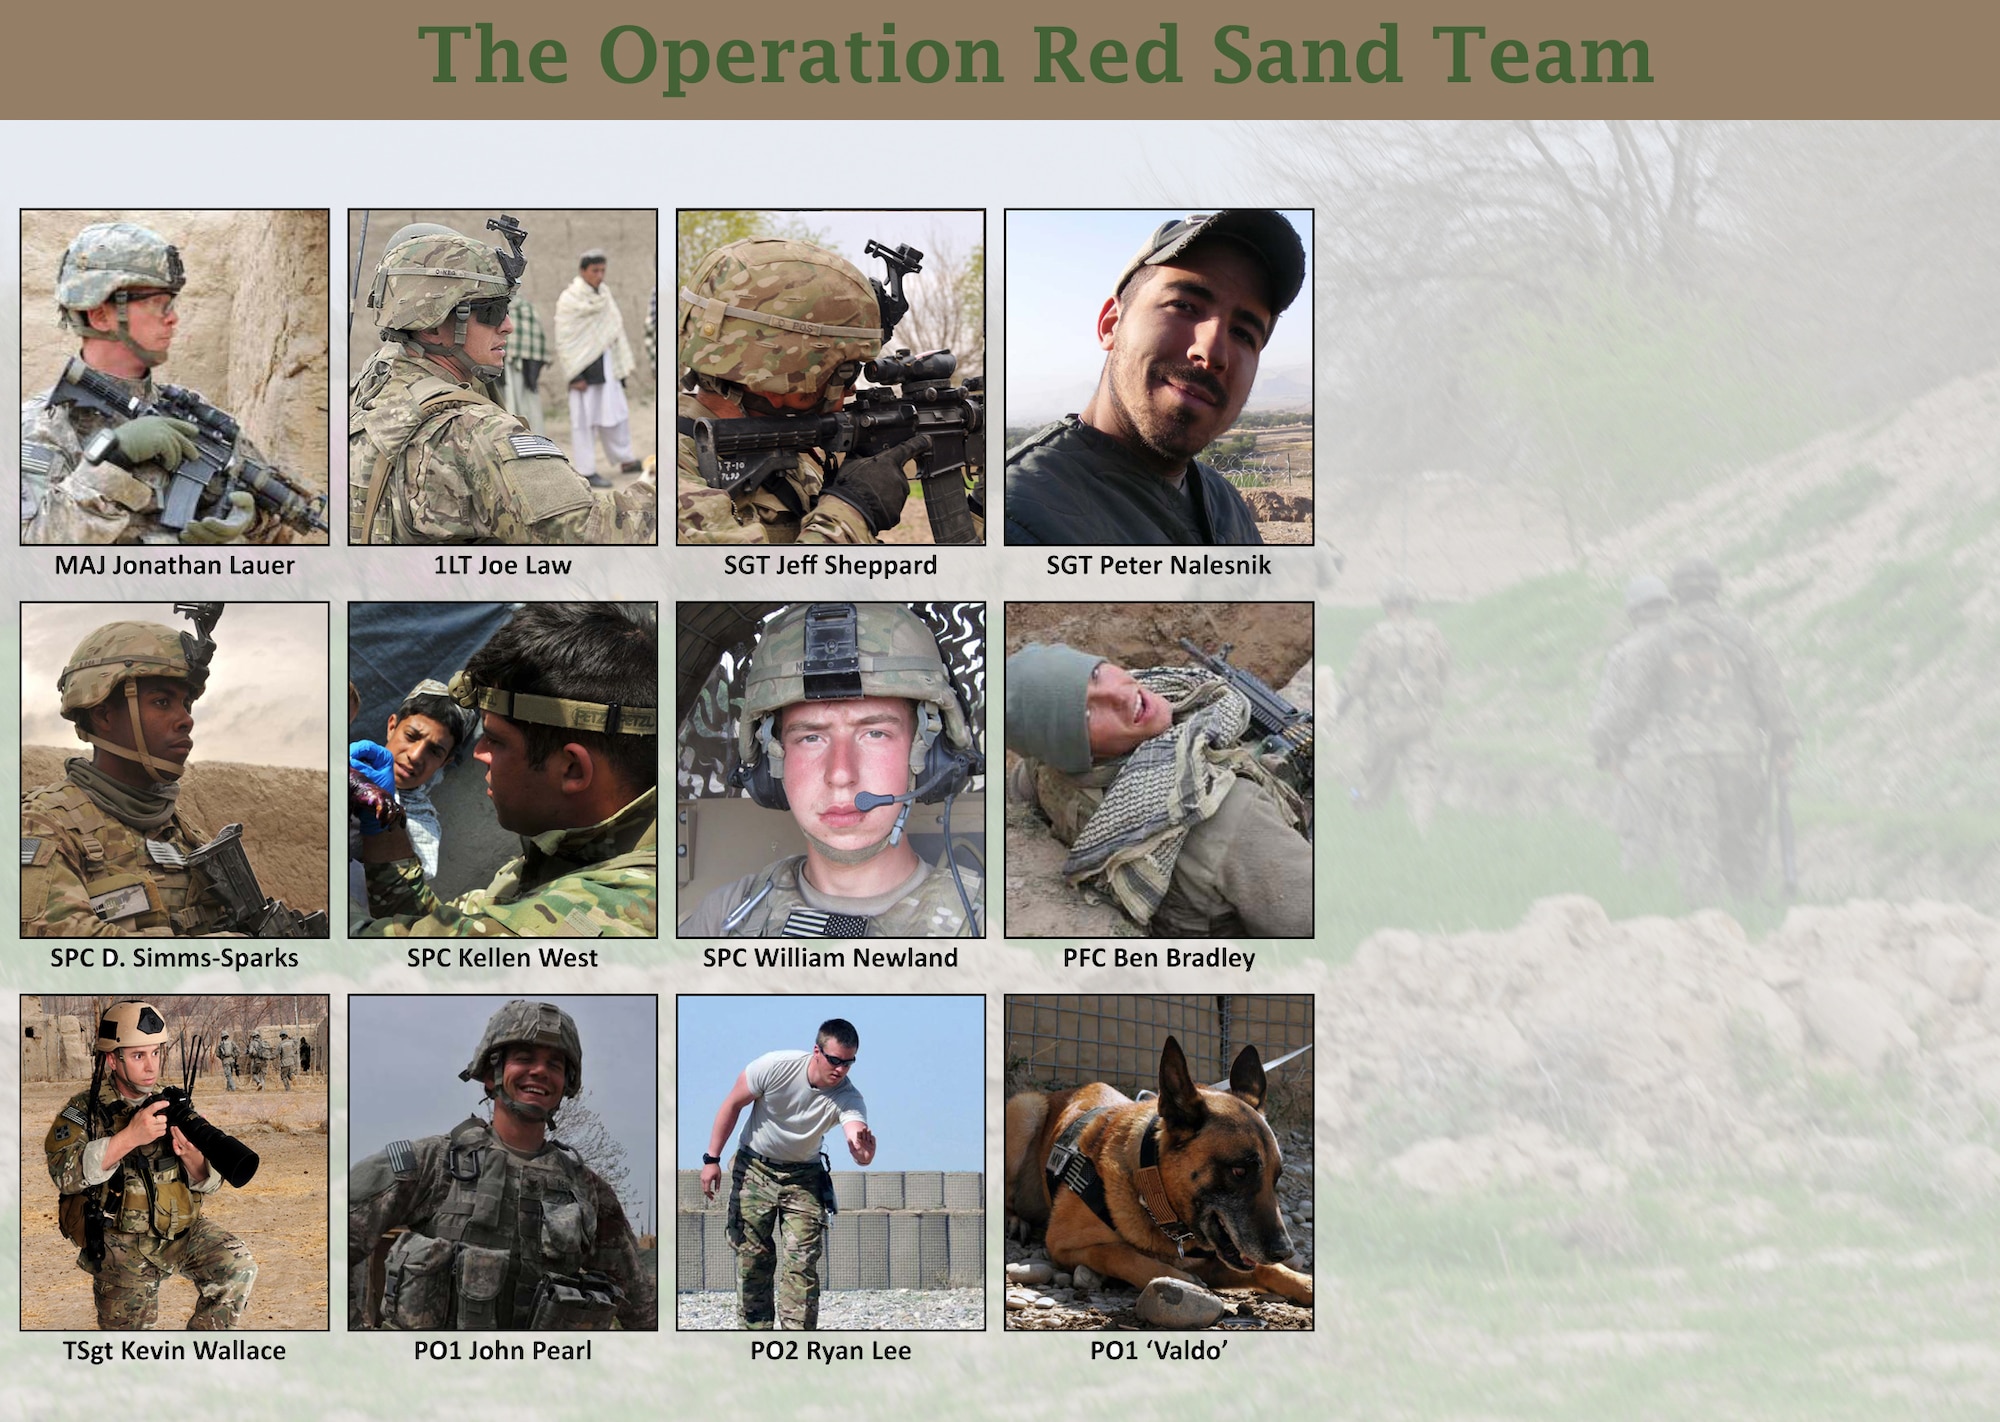 BALA MURGHAB, Afghanistan – A profile of the team of U.S. Army scouts and attachments who fought at Operation Red Sand, Bala Murghab District, Badghis Province, Afghanistan. Five Service members were wounded in the mission, including: Tech. Sgt. Kevin Wallace, military working dog Petty Officer 1st Class ‘Valdo,’ Petty Officer 2nd Class Ryan Lee, Sgt. Jeff Sheppard and Pfc. Ben Bradley. (U.S. Air Force illustration/Master Sgt. Kevin Wallace)